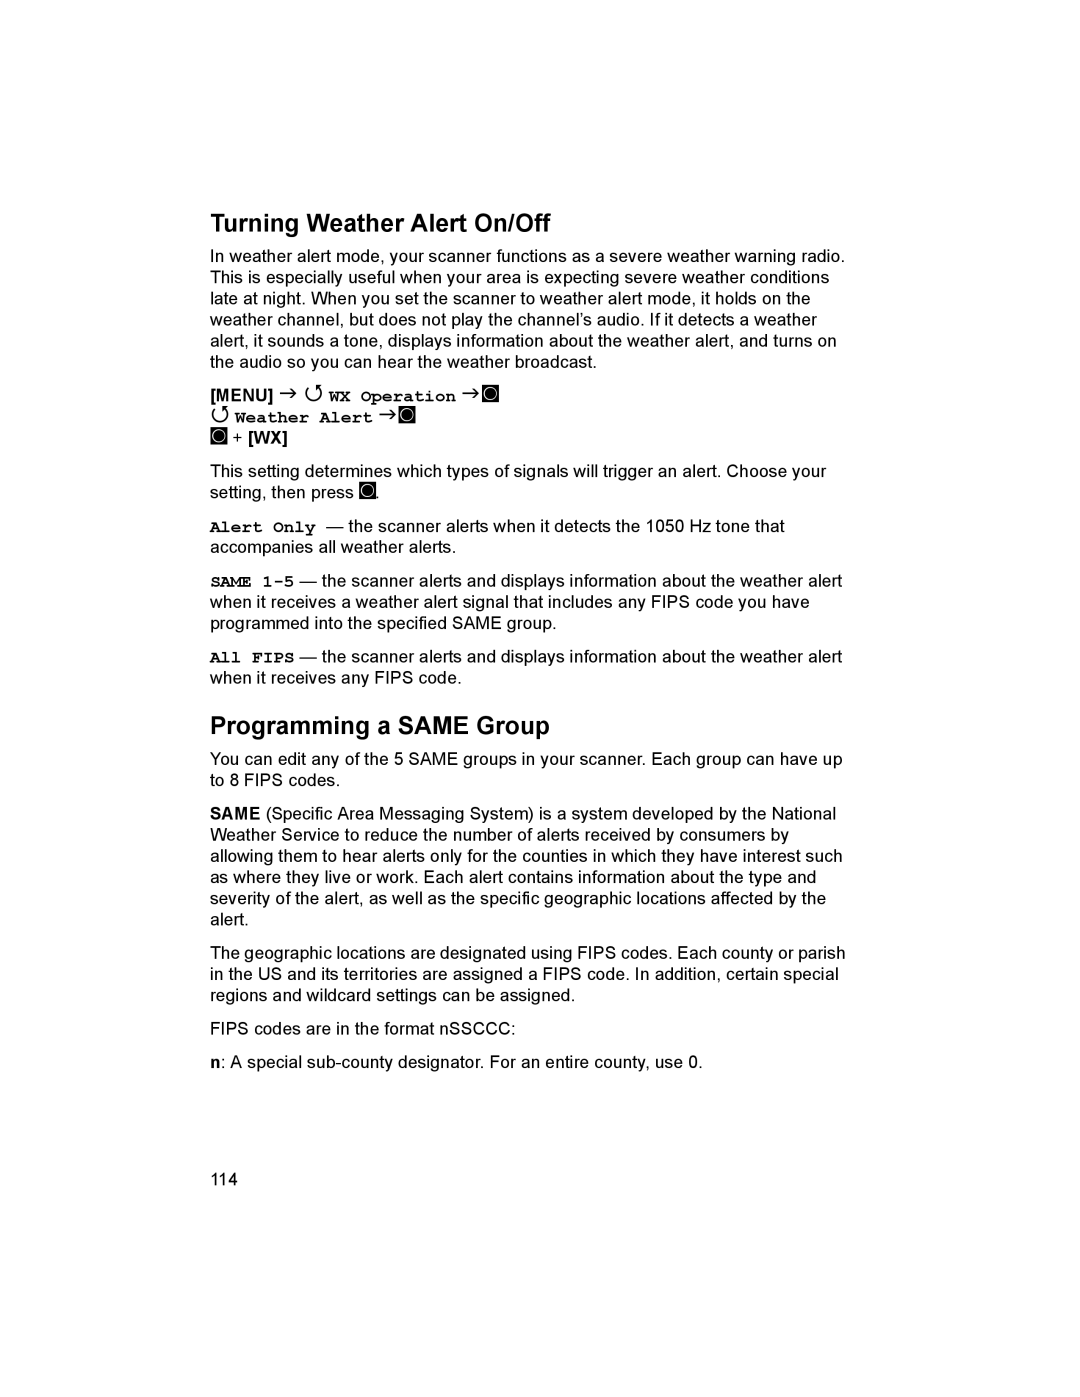 Uniden BCD996T manual Turning Weather Alert On/Off, Programming a Same Group, Menu WX Operation F Weather Alert F 